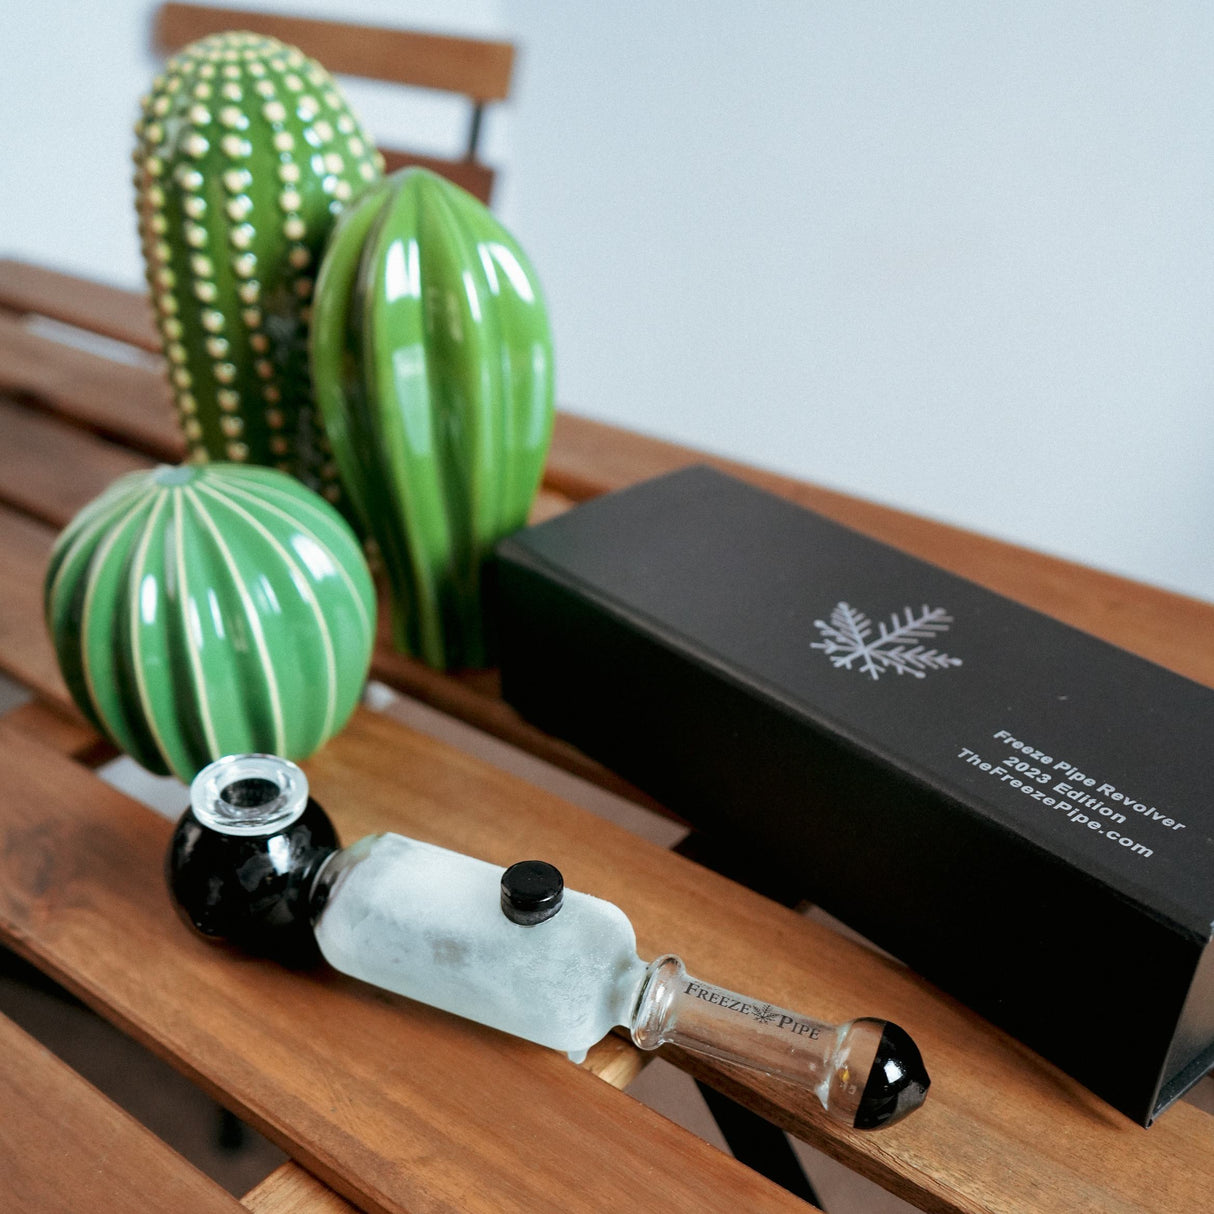 Freeze Pipe Revolver on wooden bench with sleek design and original packaging